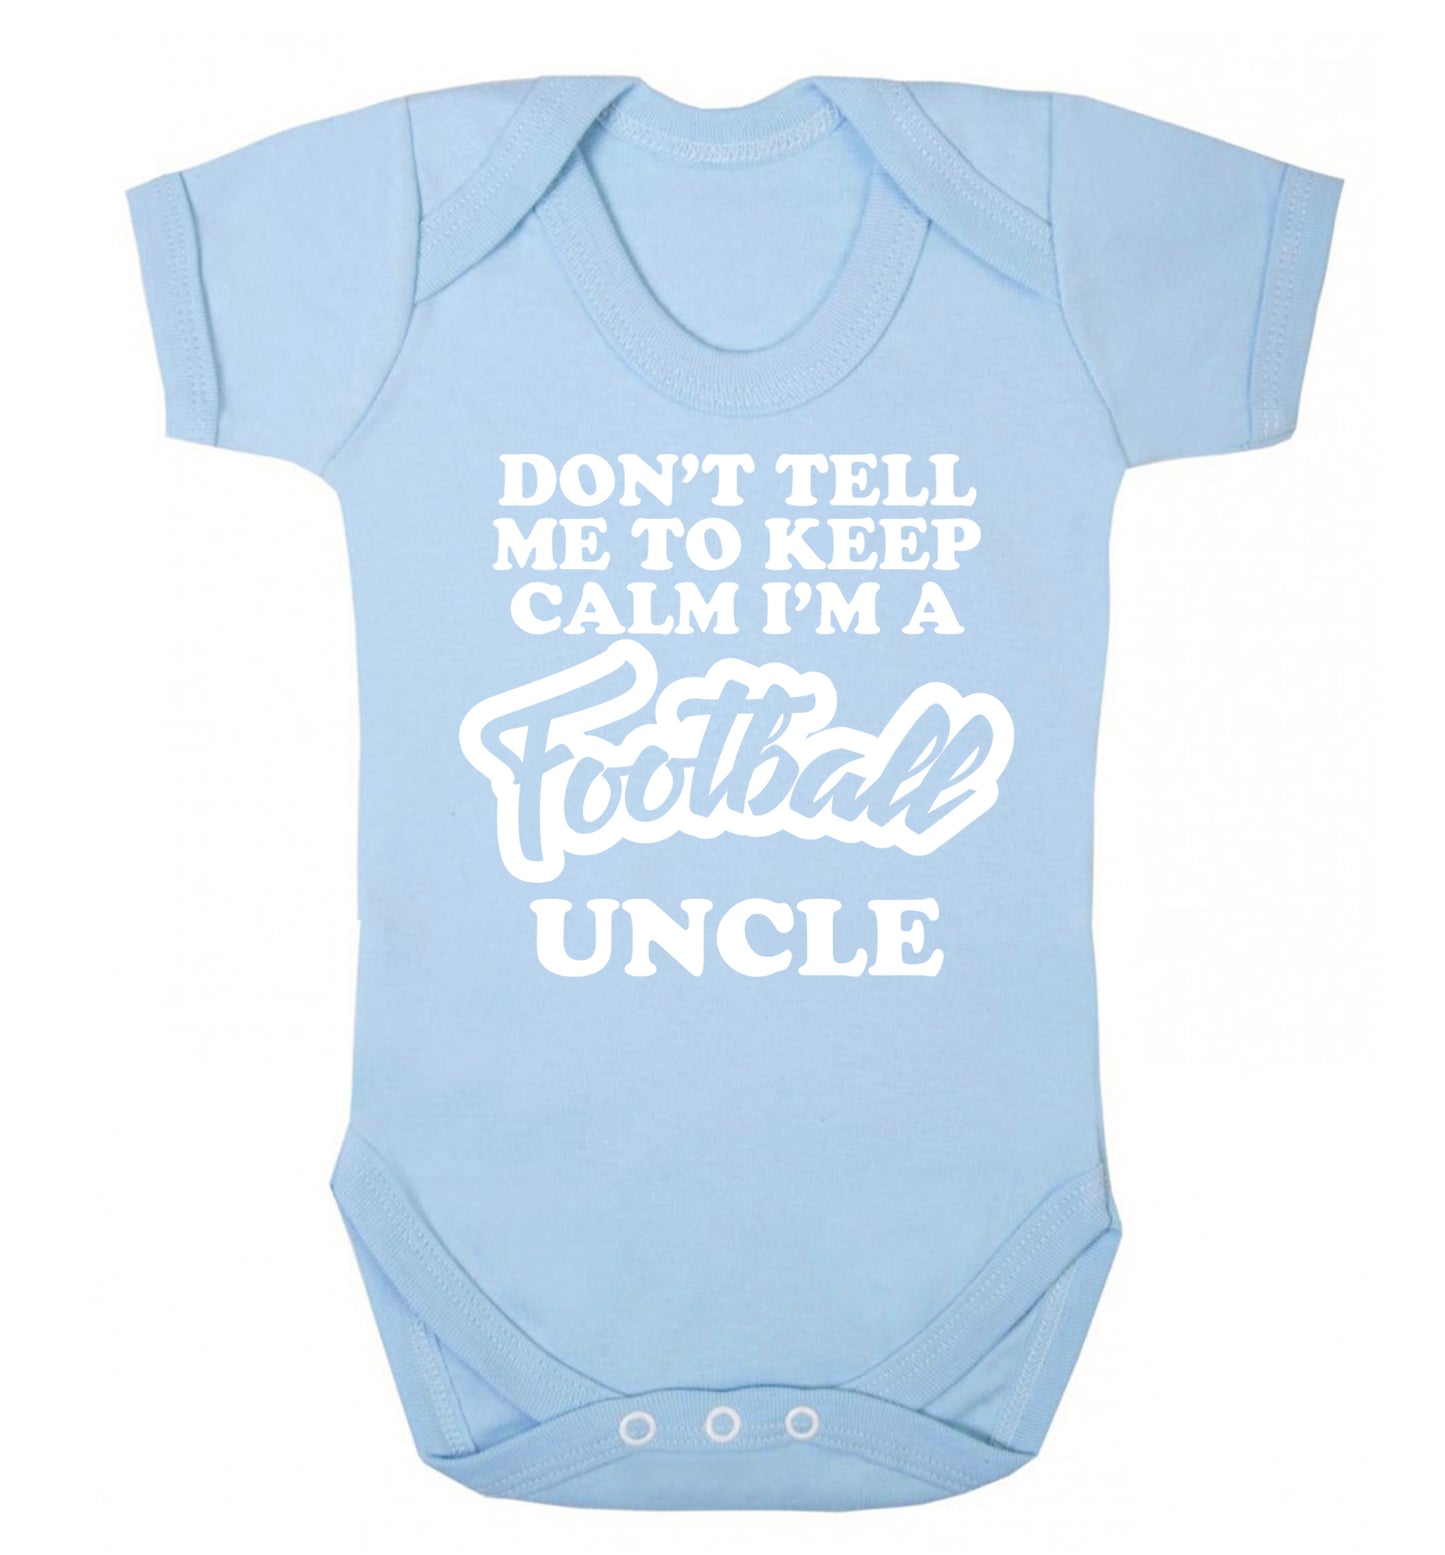 Don't tell me to keep calm I'm a football uncle Baby Vest pale blue 18-24 months